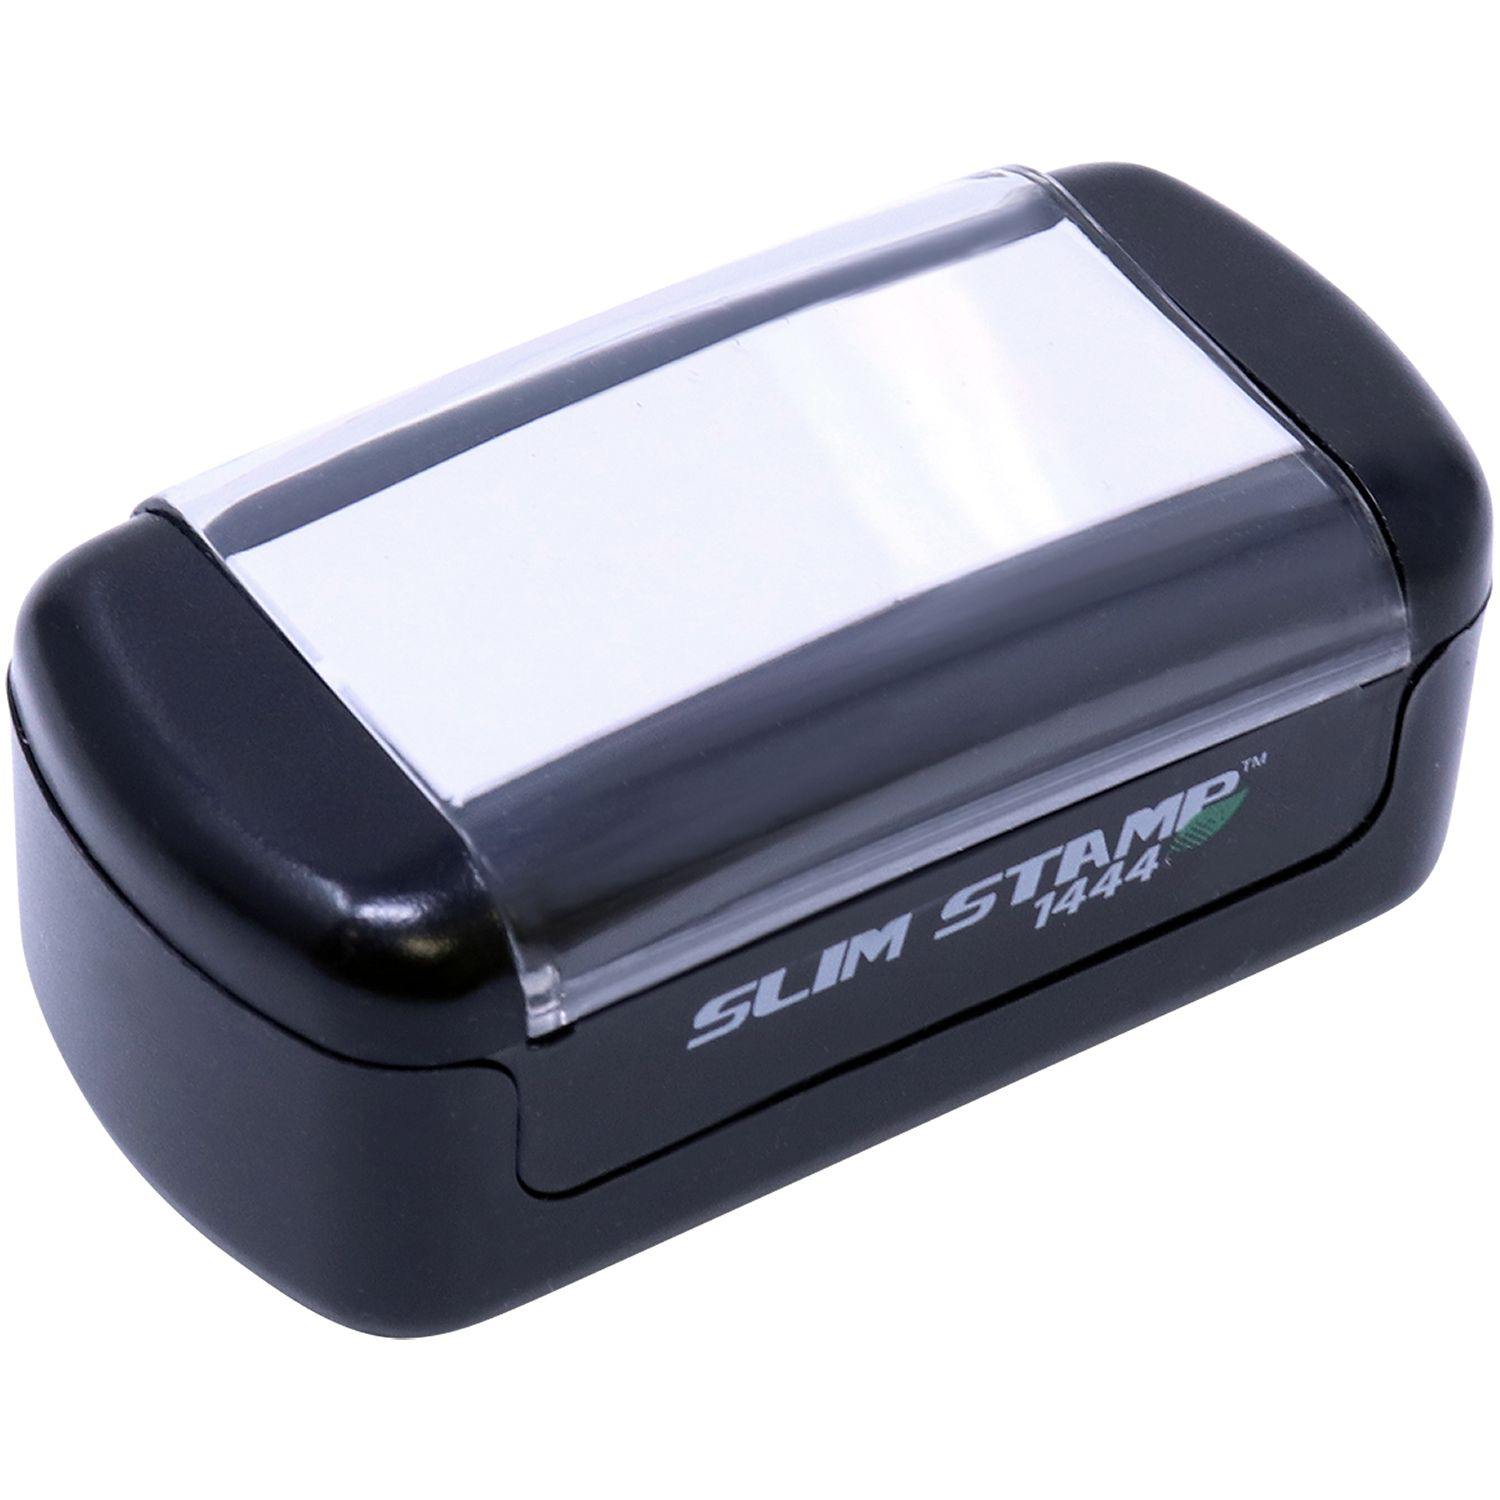 Slim Pre-Inked Bold Fragile Stamp - Engineer Seal Stamps - Brand_Slim, Impression Size_Small, Stamp Type_Pre-Inked Stamp, Type of Use_General, Type of Use_Postal & Mailing, Type of Use_Shipping & Receiving